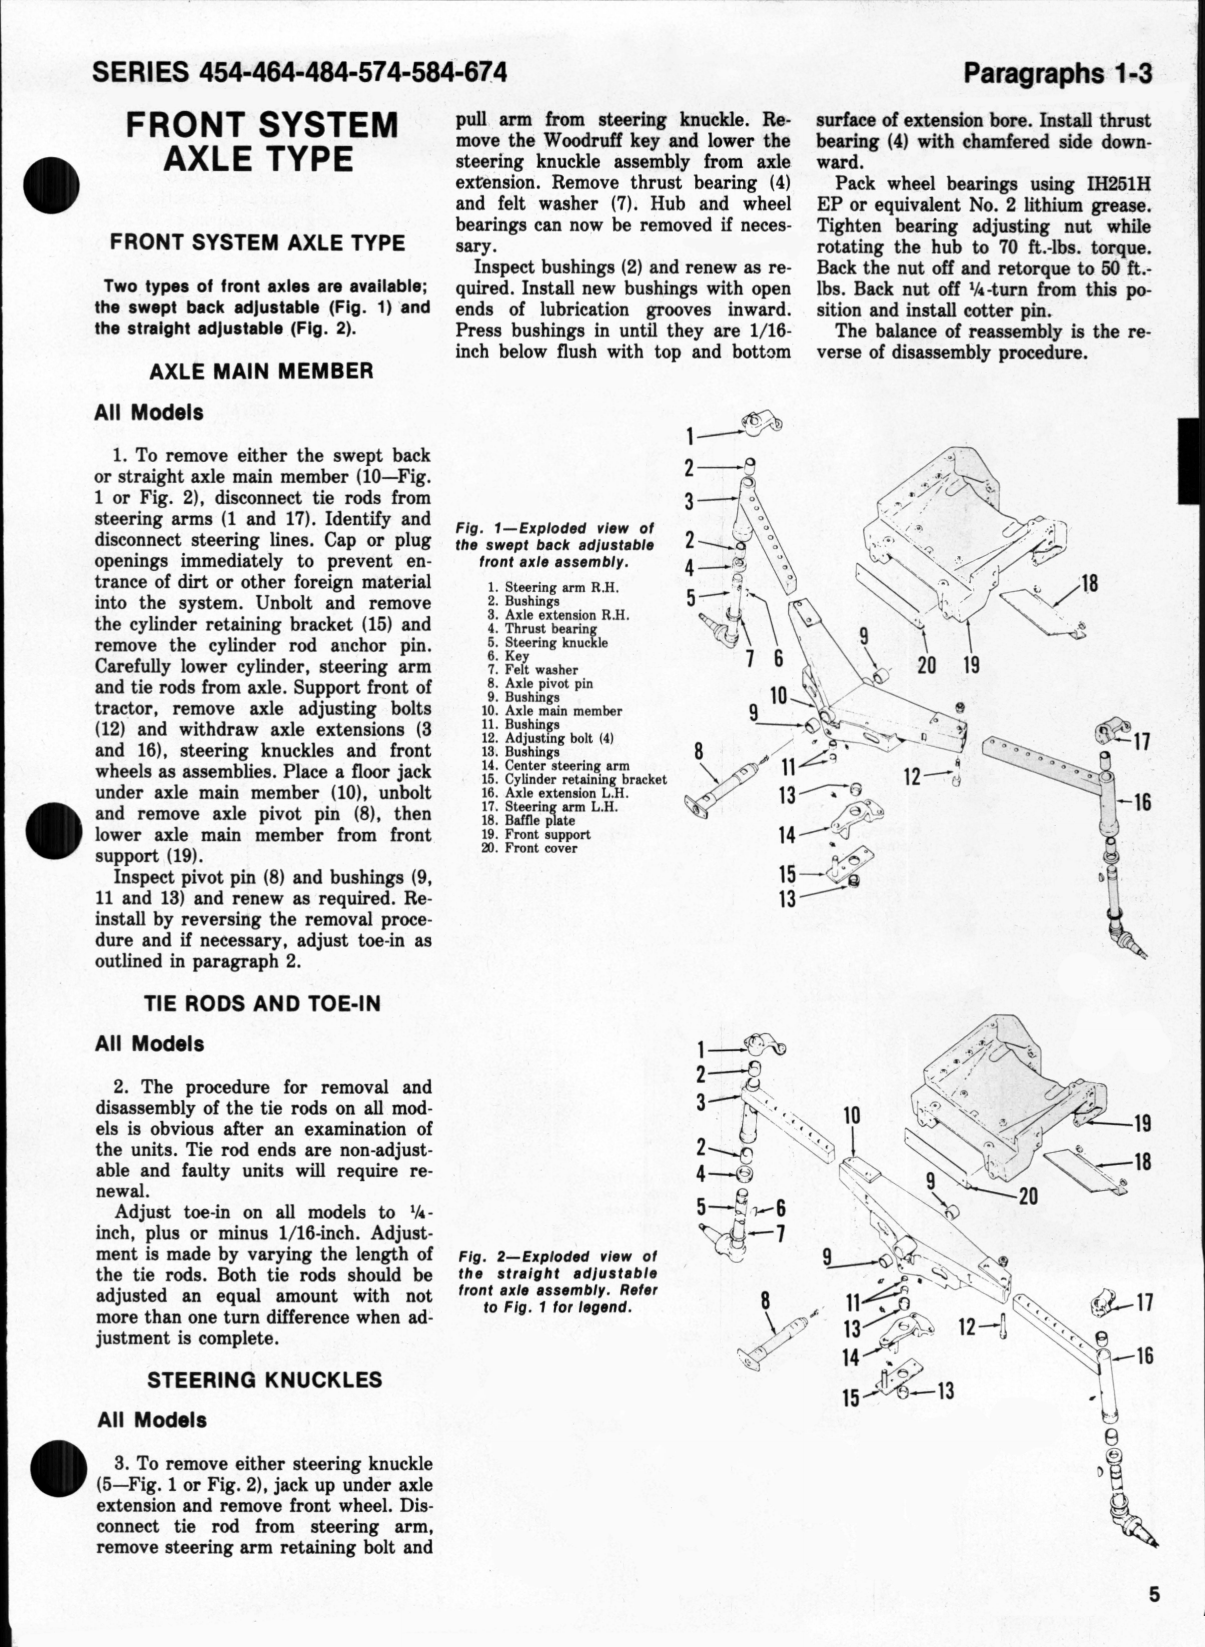 1970-1984 IH International 454, 464, 484, 574, 584, 674 tractor manual Preview image 5